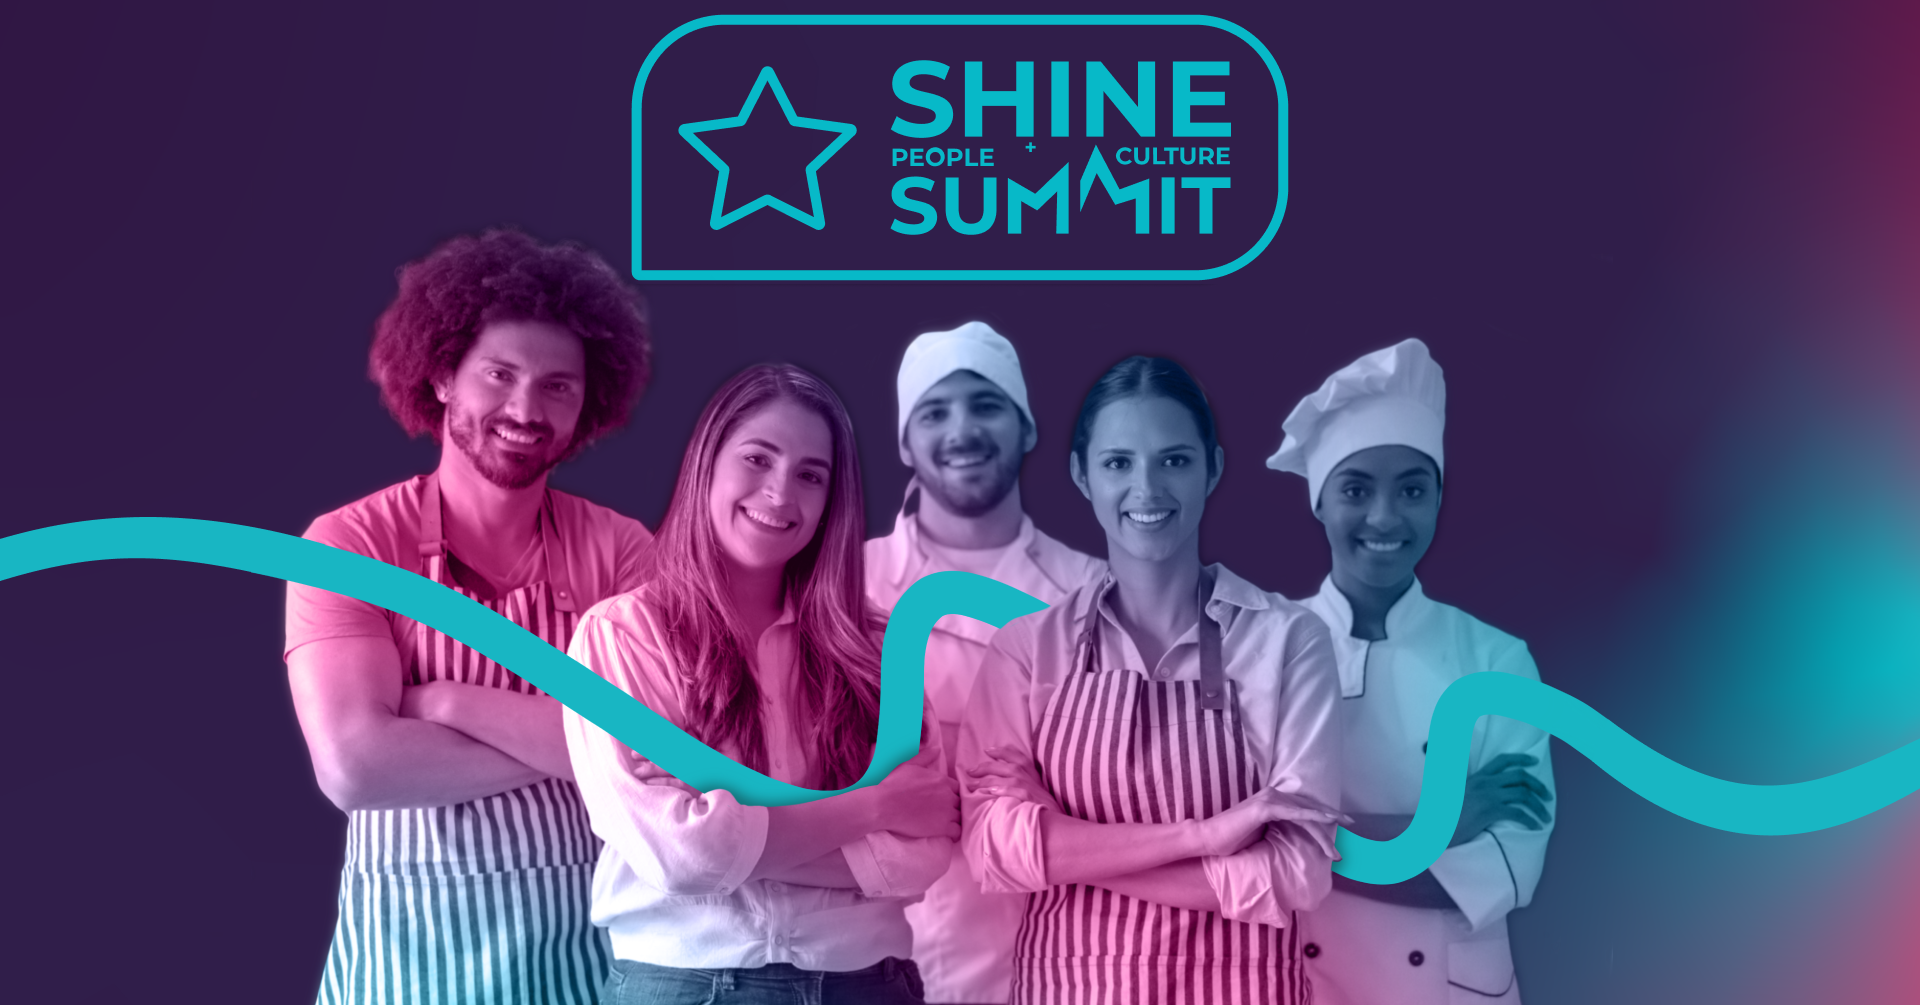 Shine Summit Hospitality leaders share their insight